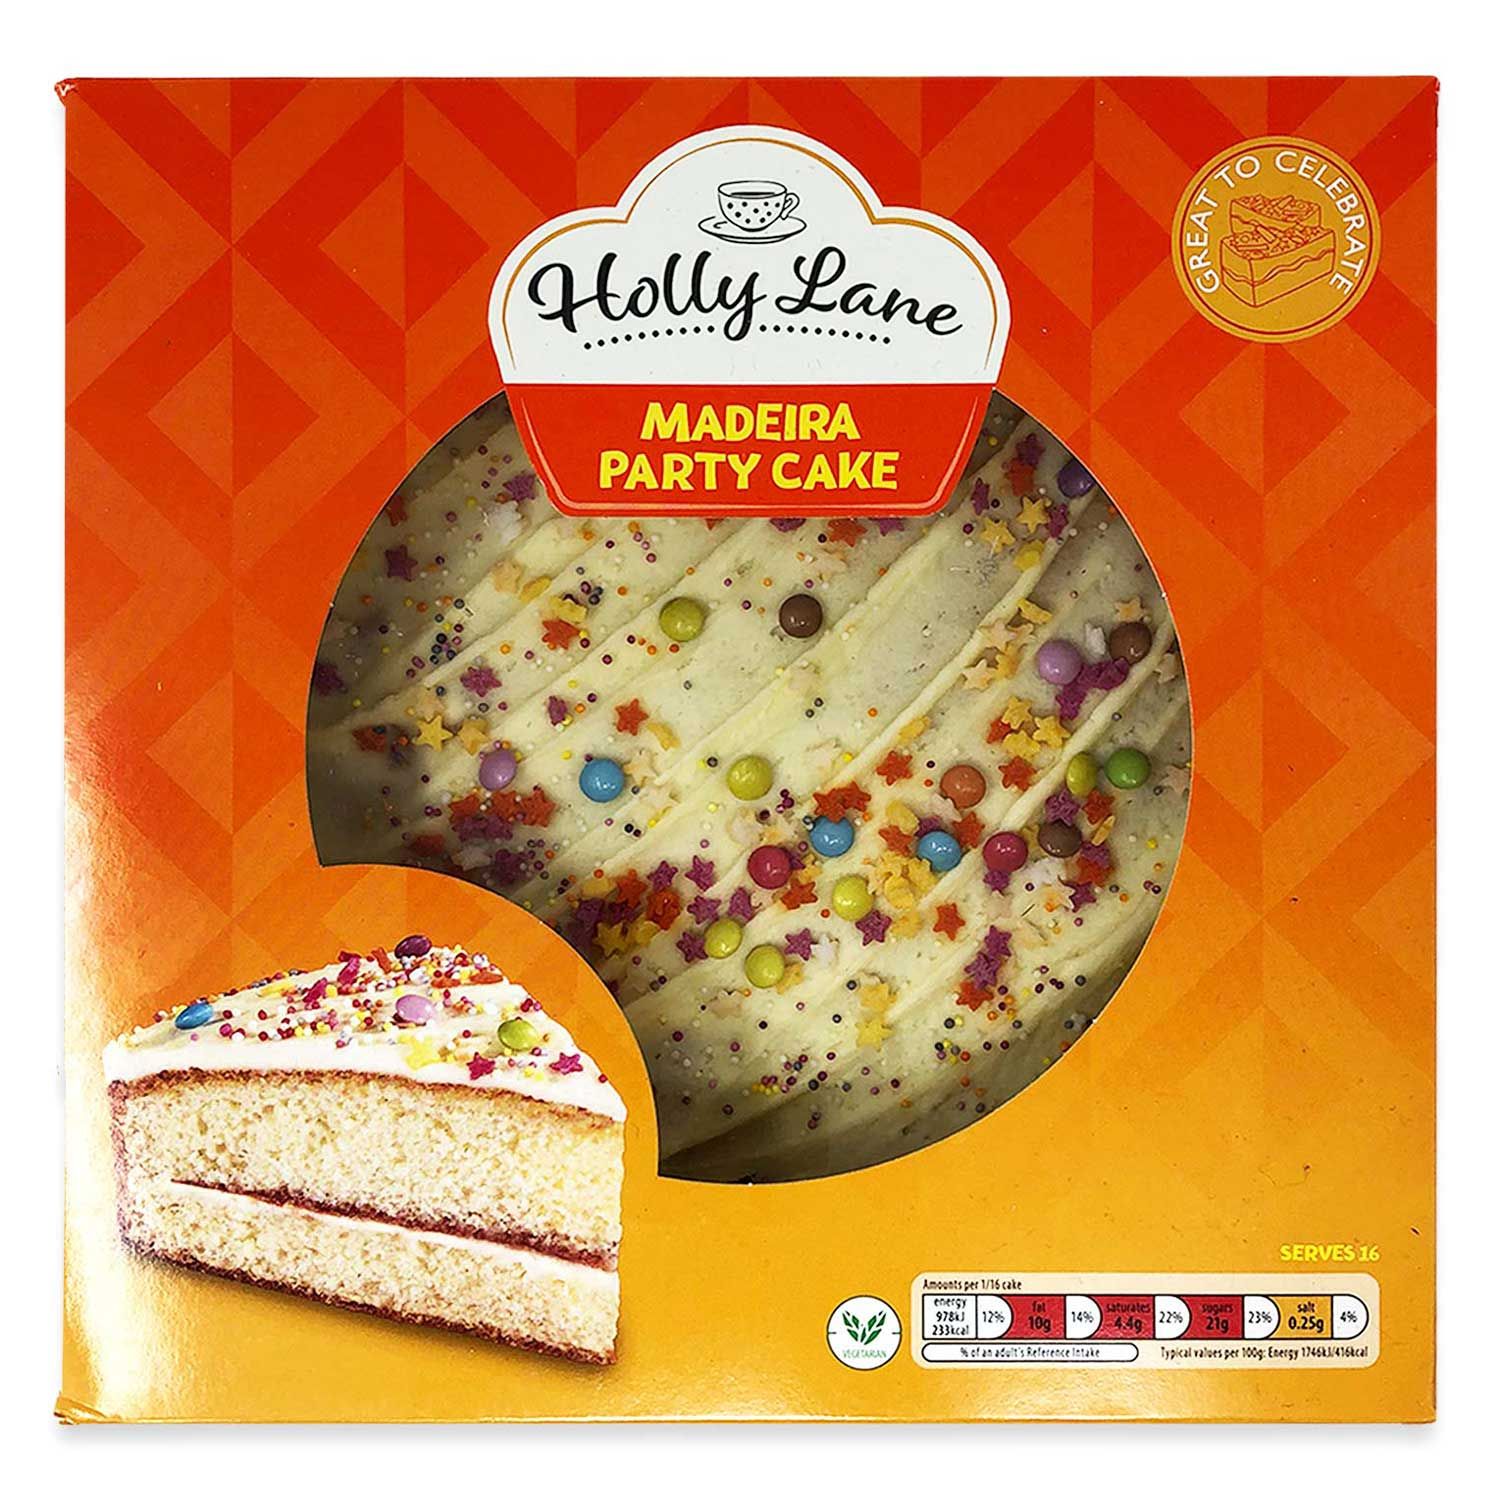 Aldi's Holly Lane Madeira party cake for £4.69